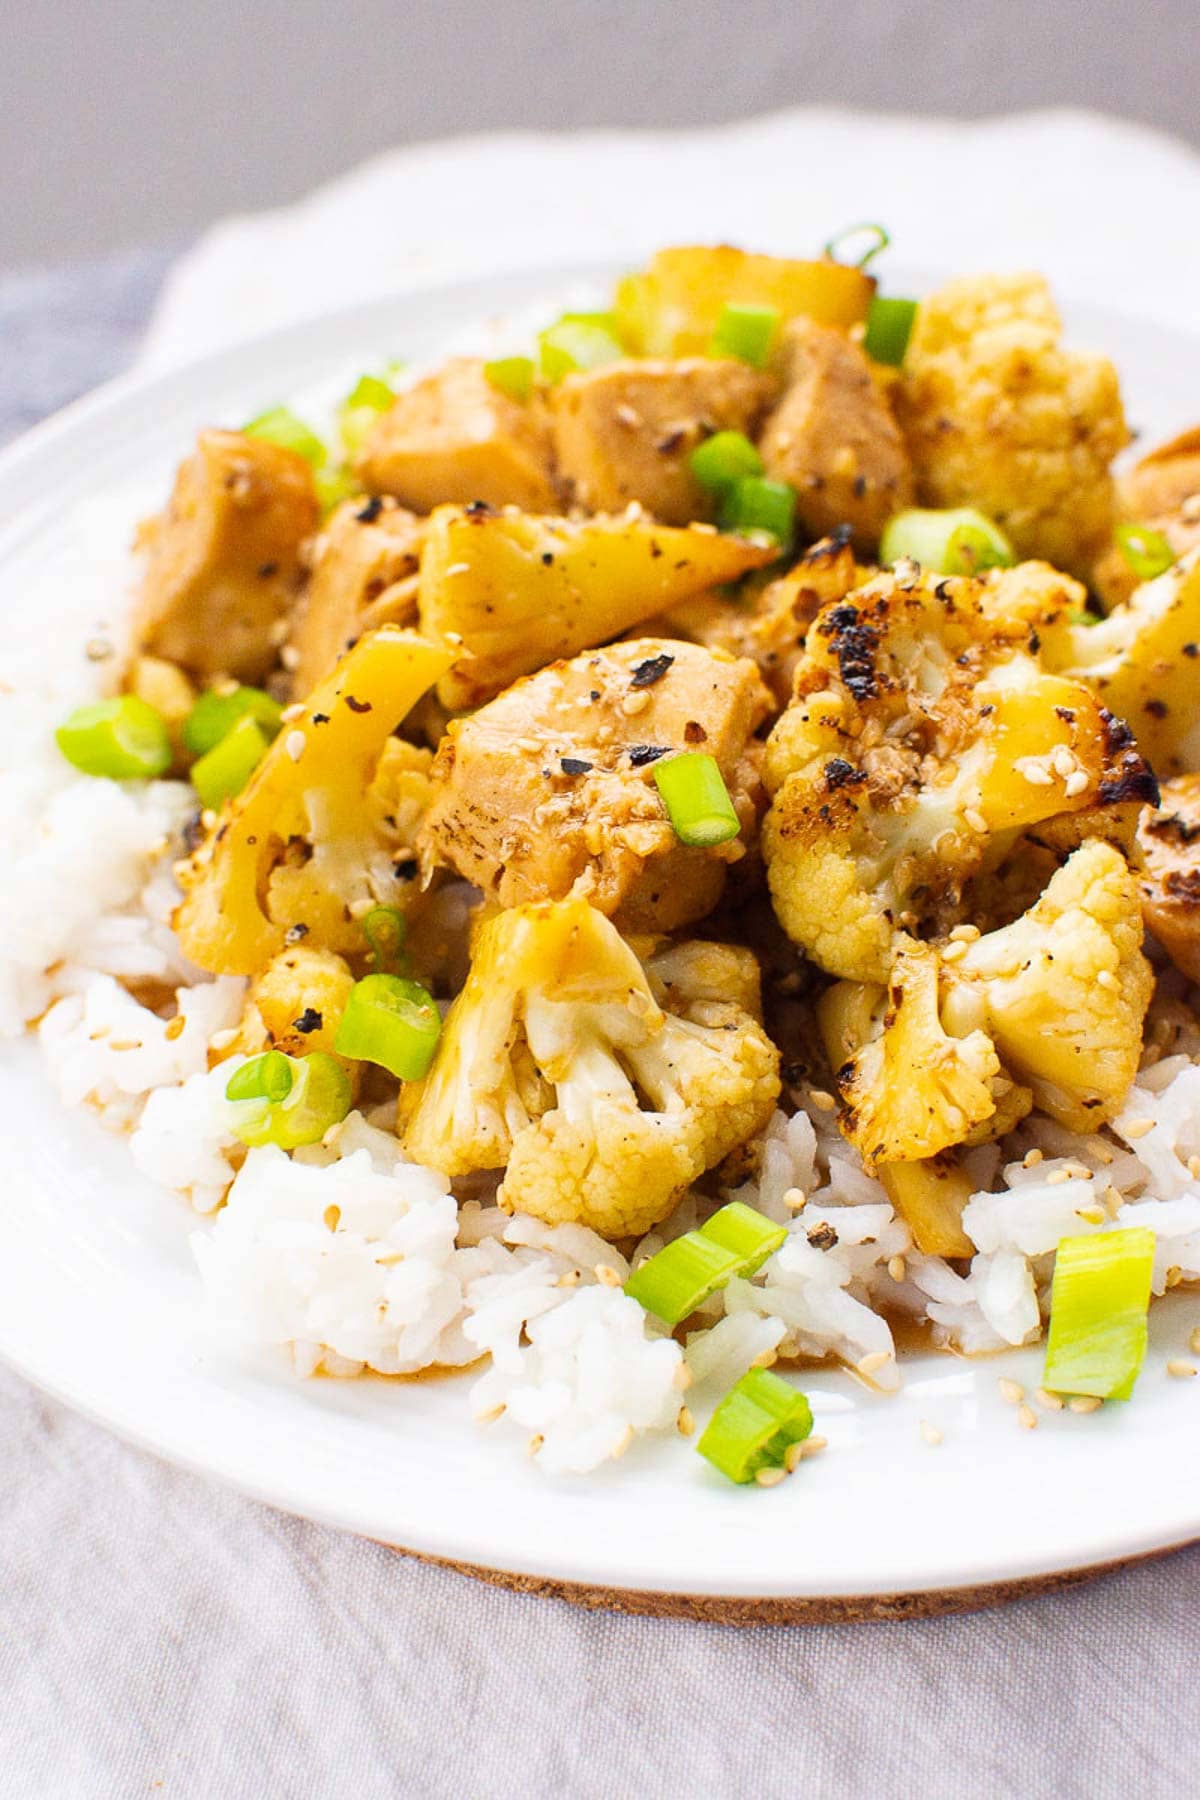 Teriyaki chicken and cauliflower over white rice and garnished with green onion.